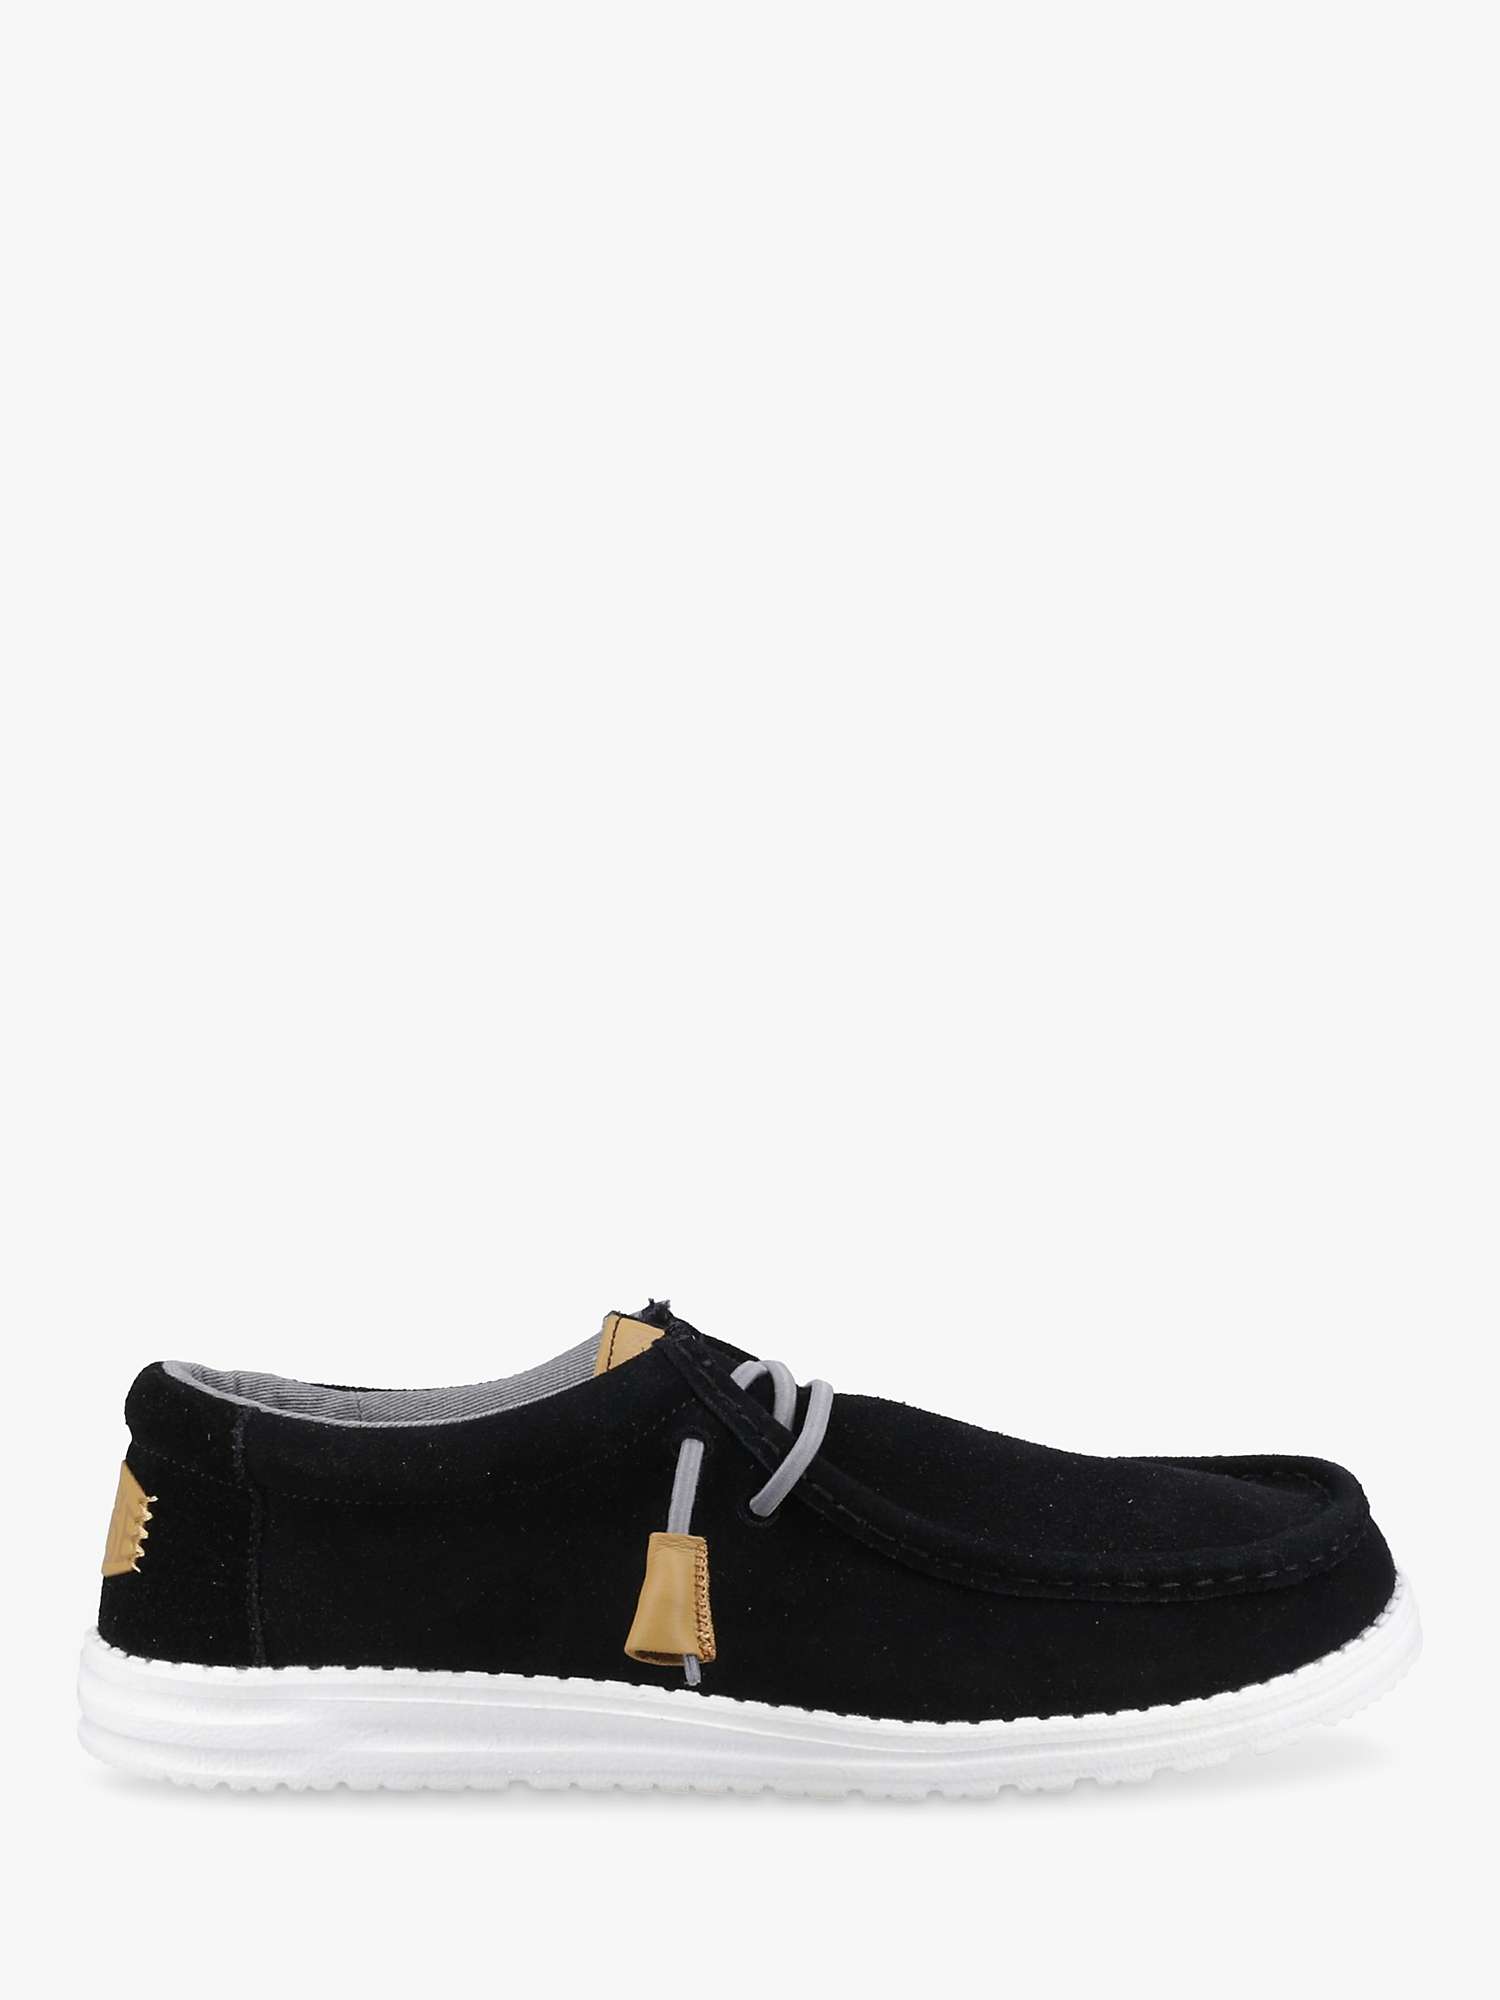 Buy Hey Dude Wally Craft Suede Lace-Up Shoes, Black Online at johnlewis.com